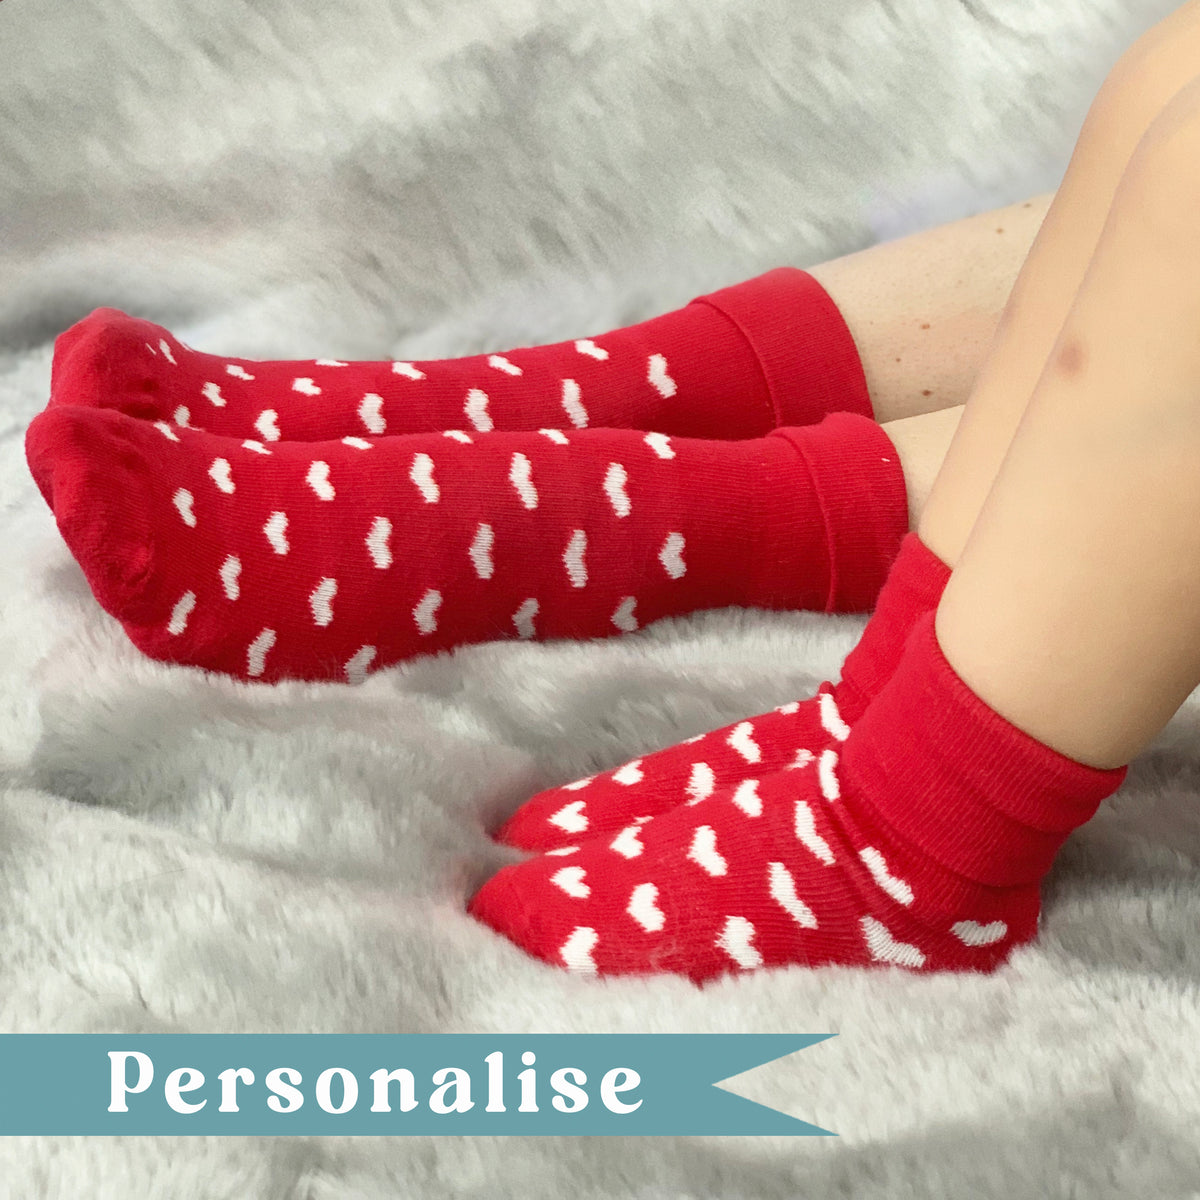 Personalised Mini Me Matching Adult and Child Socks Gift Set in Red Hearts - The Perfect Personalised Birthday or Mother's Day Gift ♥️